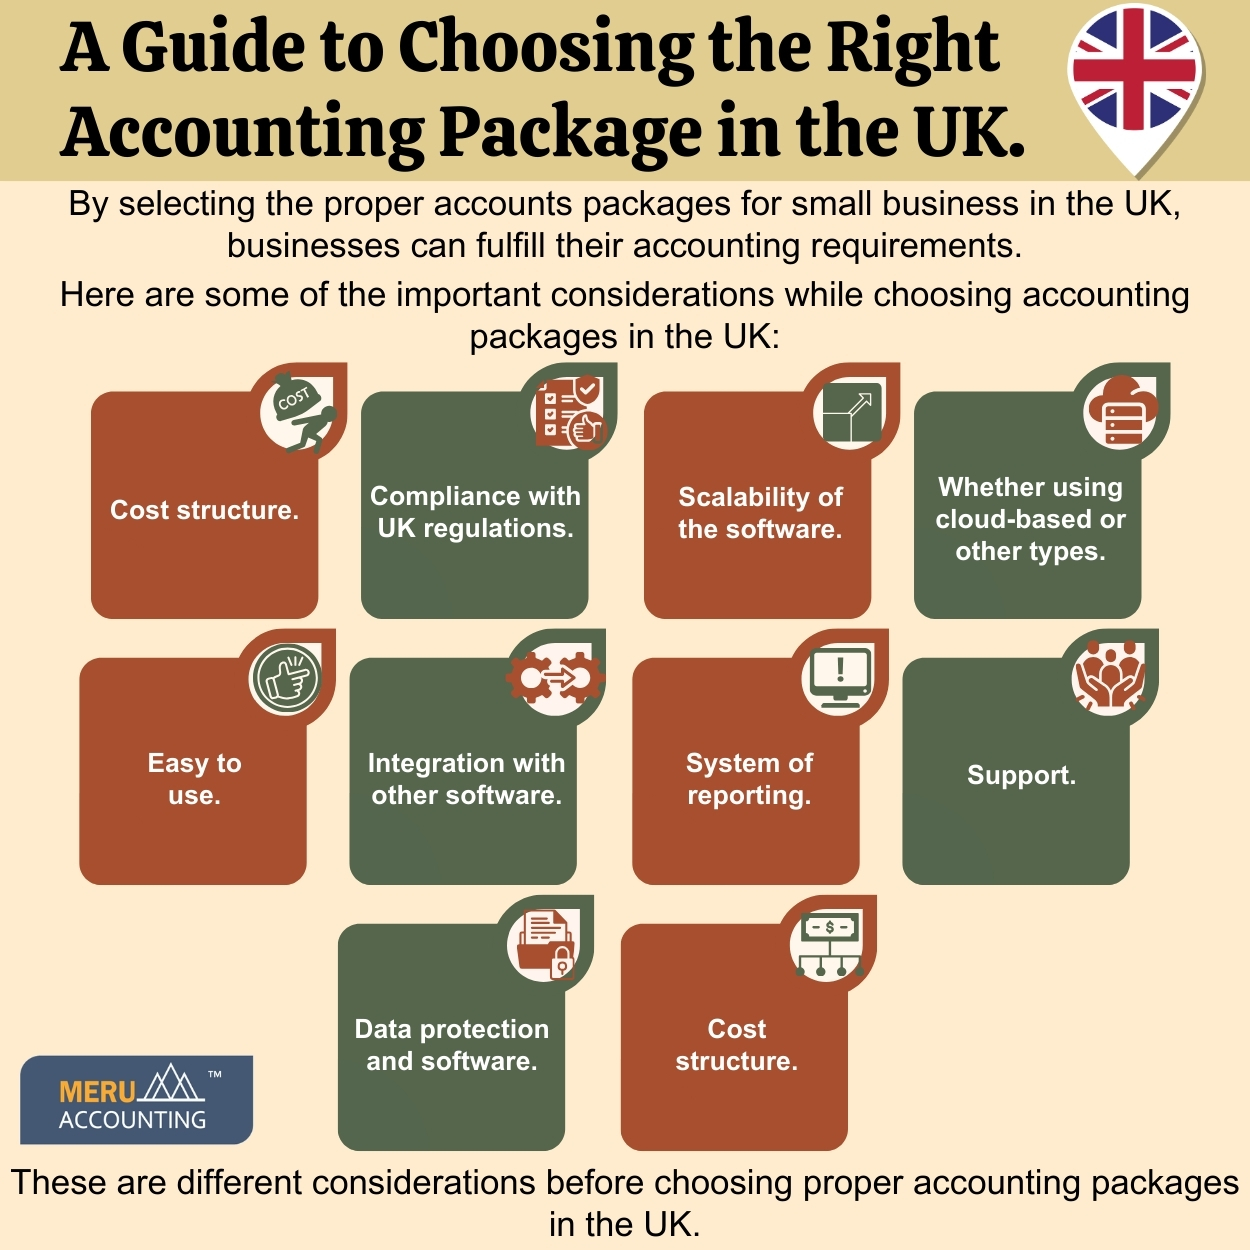 A Guide to Choosing the Right Accounting Package in the UK. 1250 by 1250 v1 1